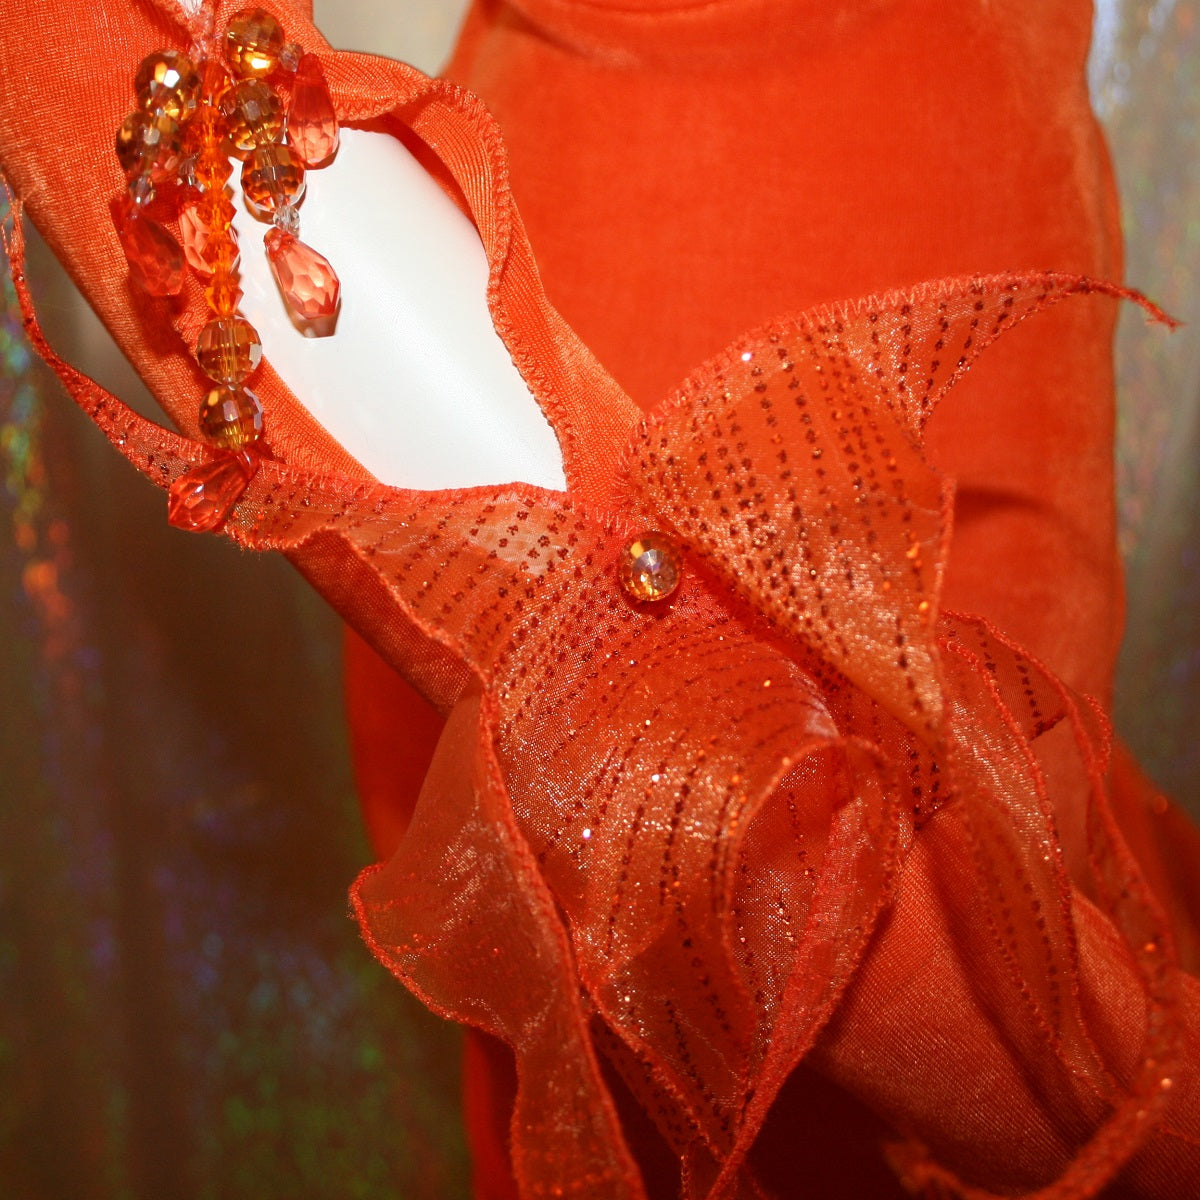 Crystal's Creations close up right wrist view of Orange Latin/rhythm dress was created in luxurious orange solid slinky with oodles of glitter organza flounces & accents, embellished with a touch of Swarovski hand beading.